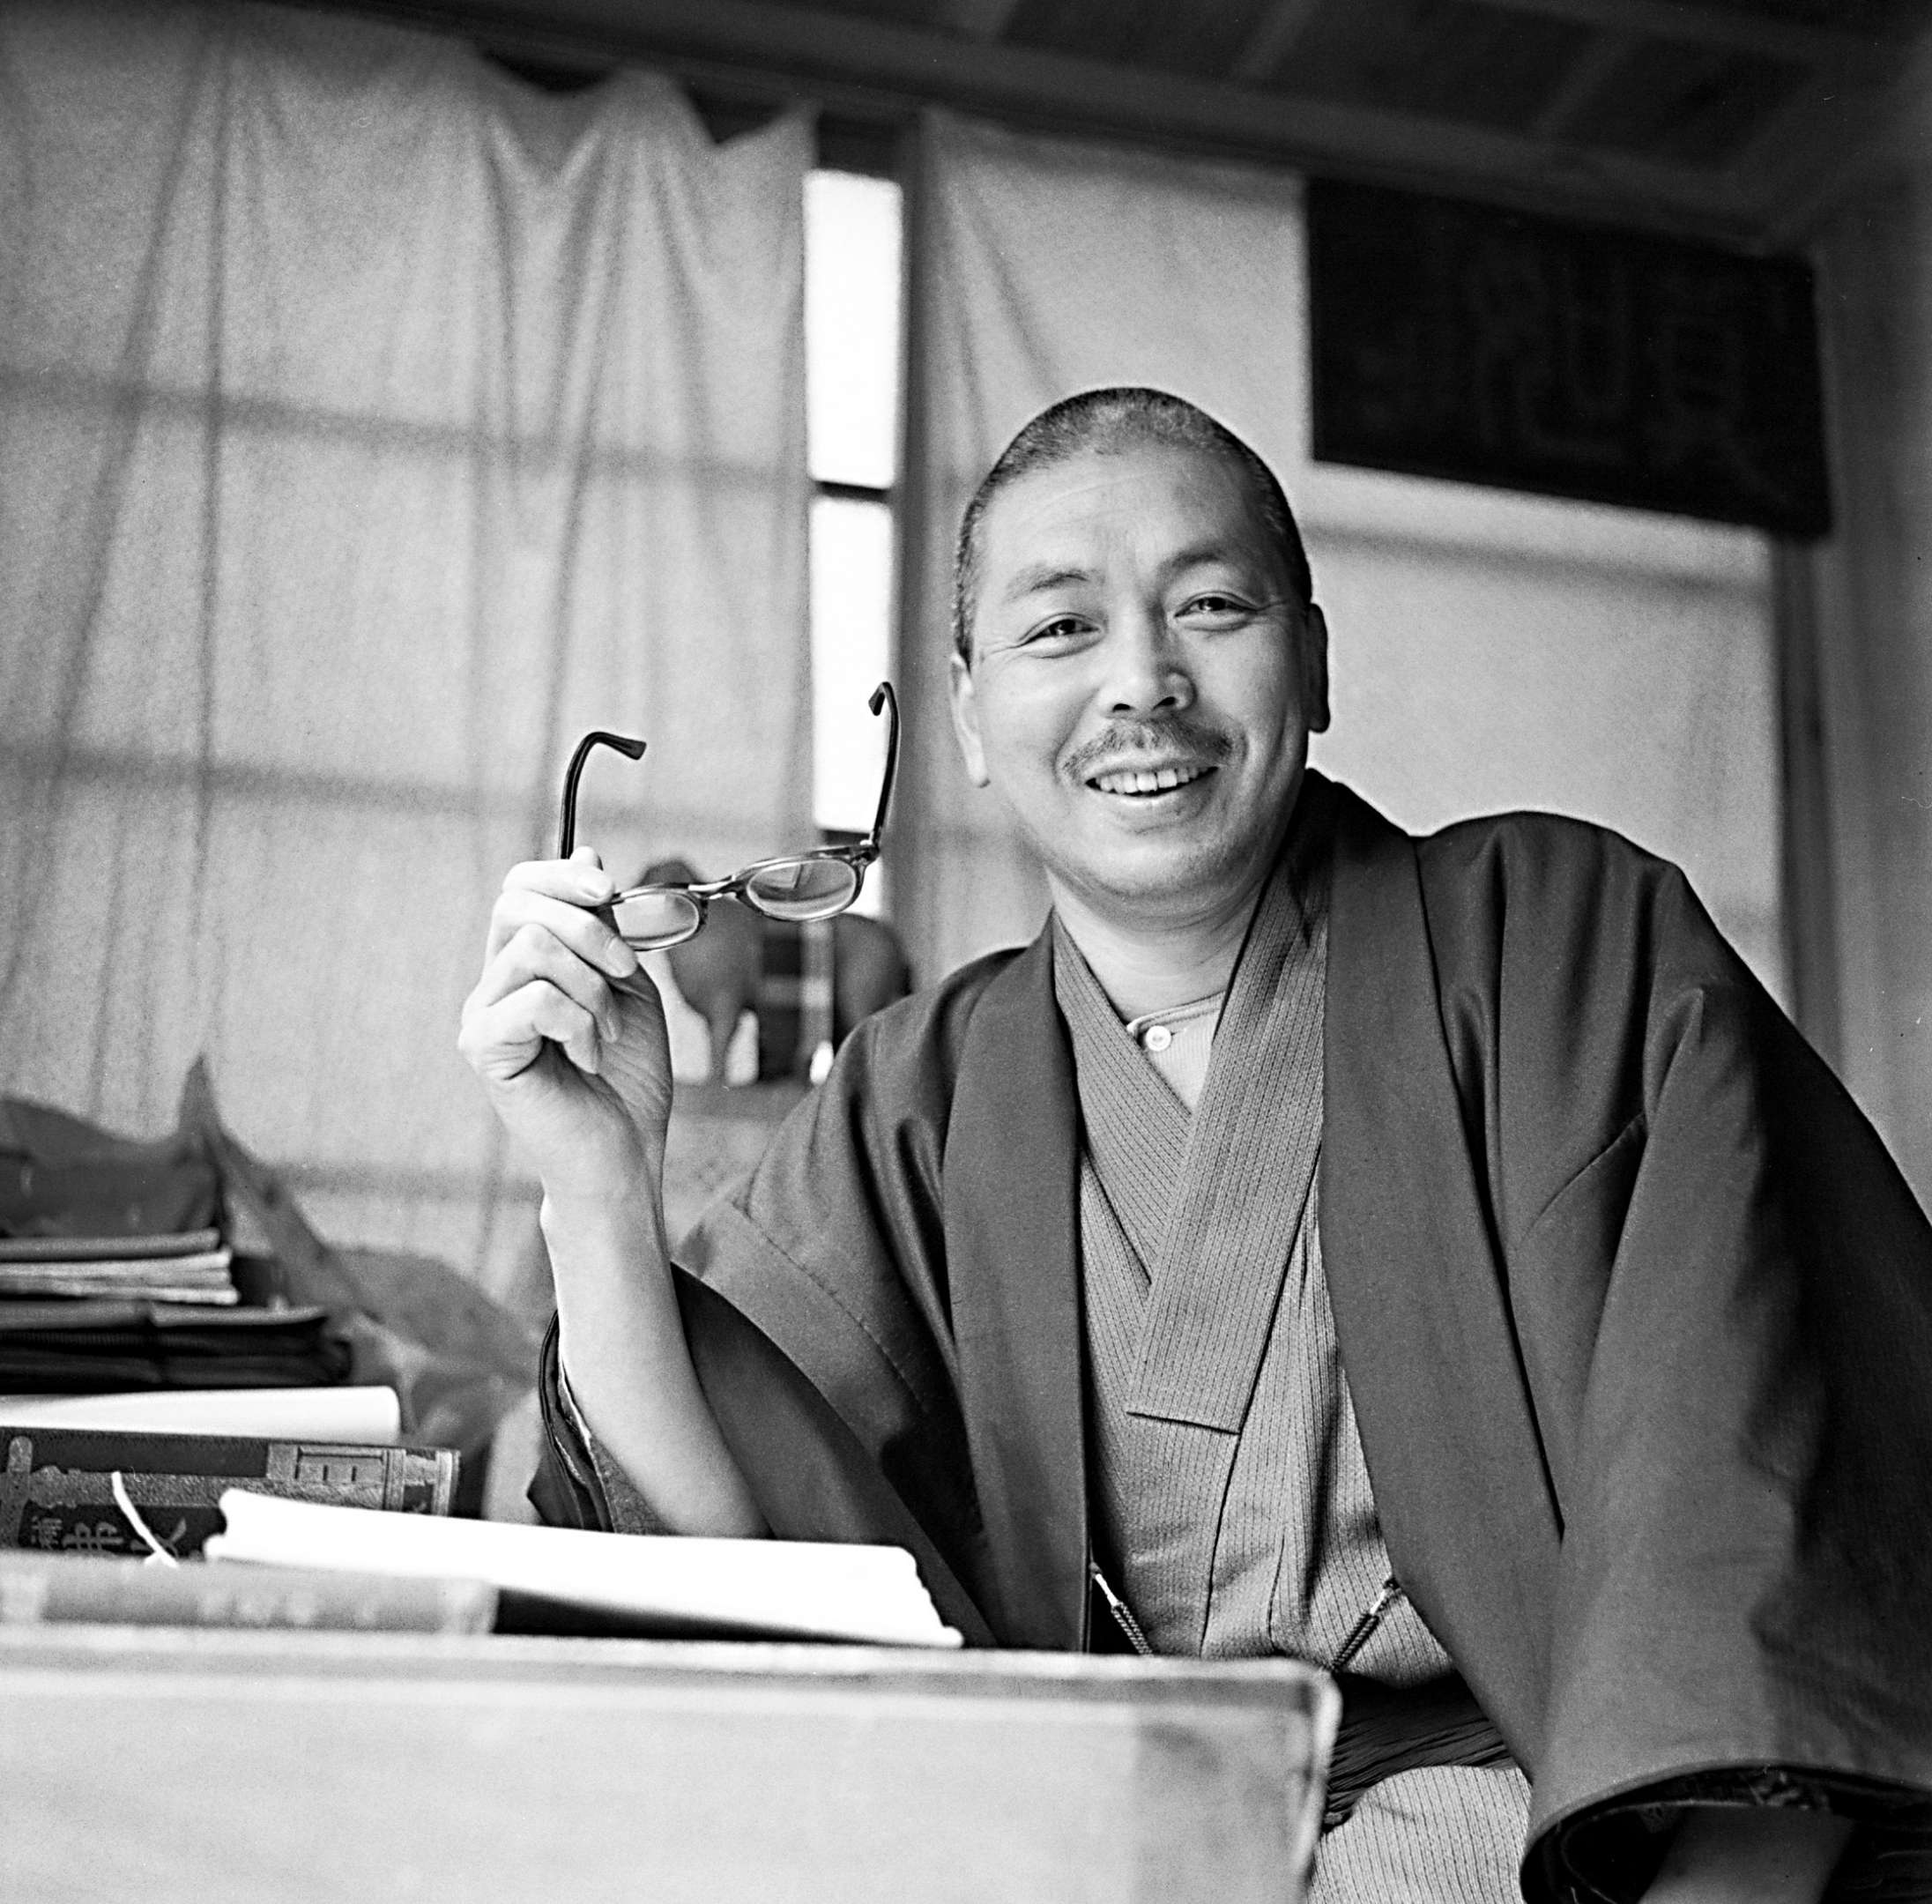 A candid photograph of Shinjo smiling in his study, shaven headed, mustachioed, in casual kimono, with elbow resting on table and reading glasses in hand.